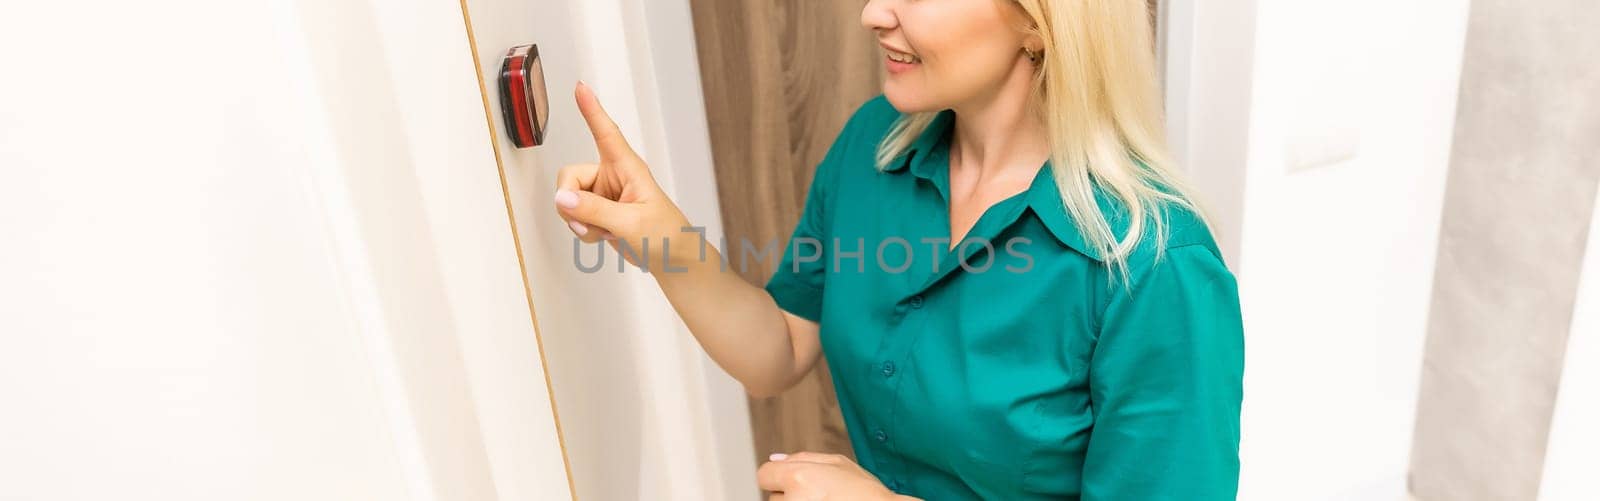 A woman is pressing the up button of a wall attached house thermostat with digital display showing the temperature. A concept image for electricity bill, heating, cooling, eco friendly, saving etc.